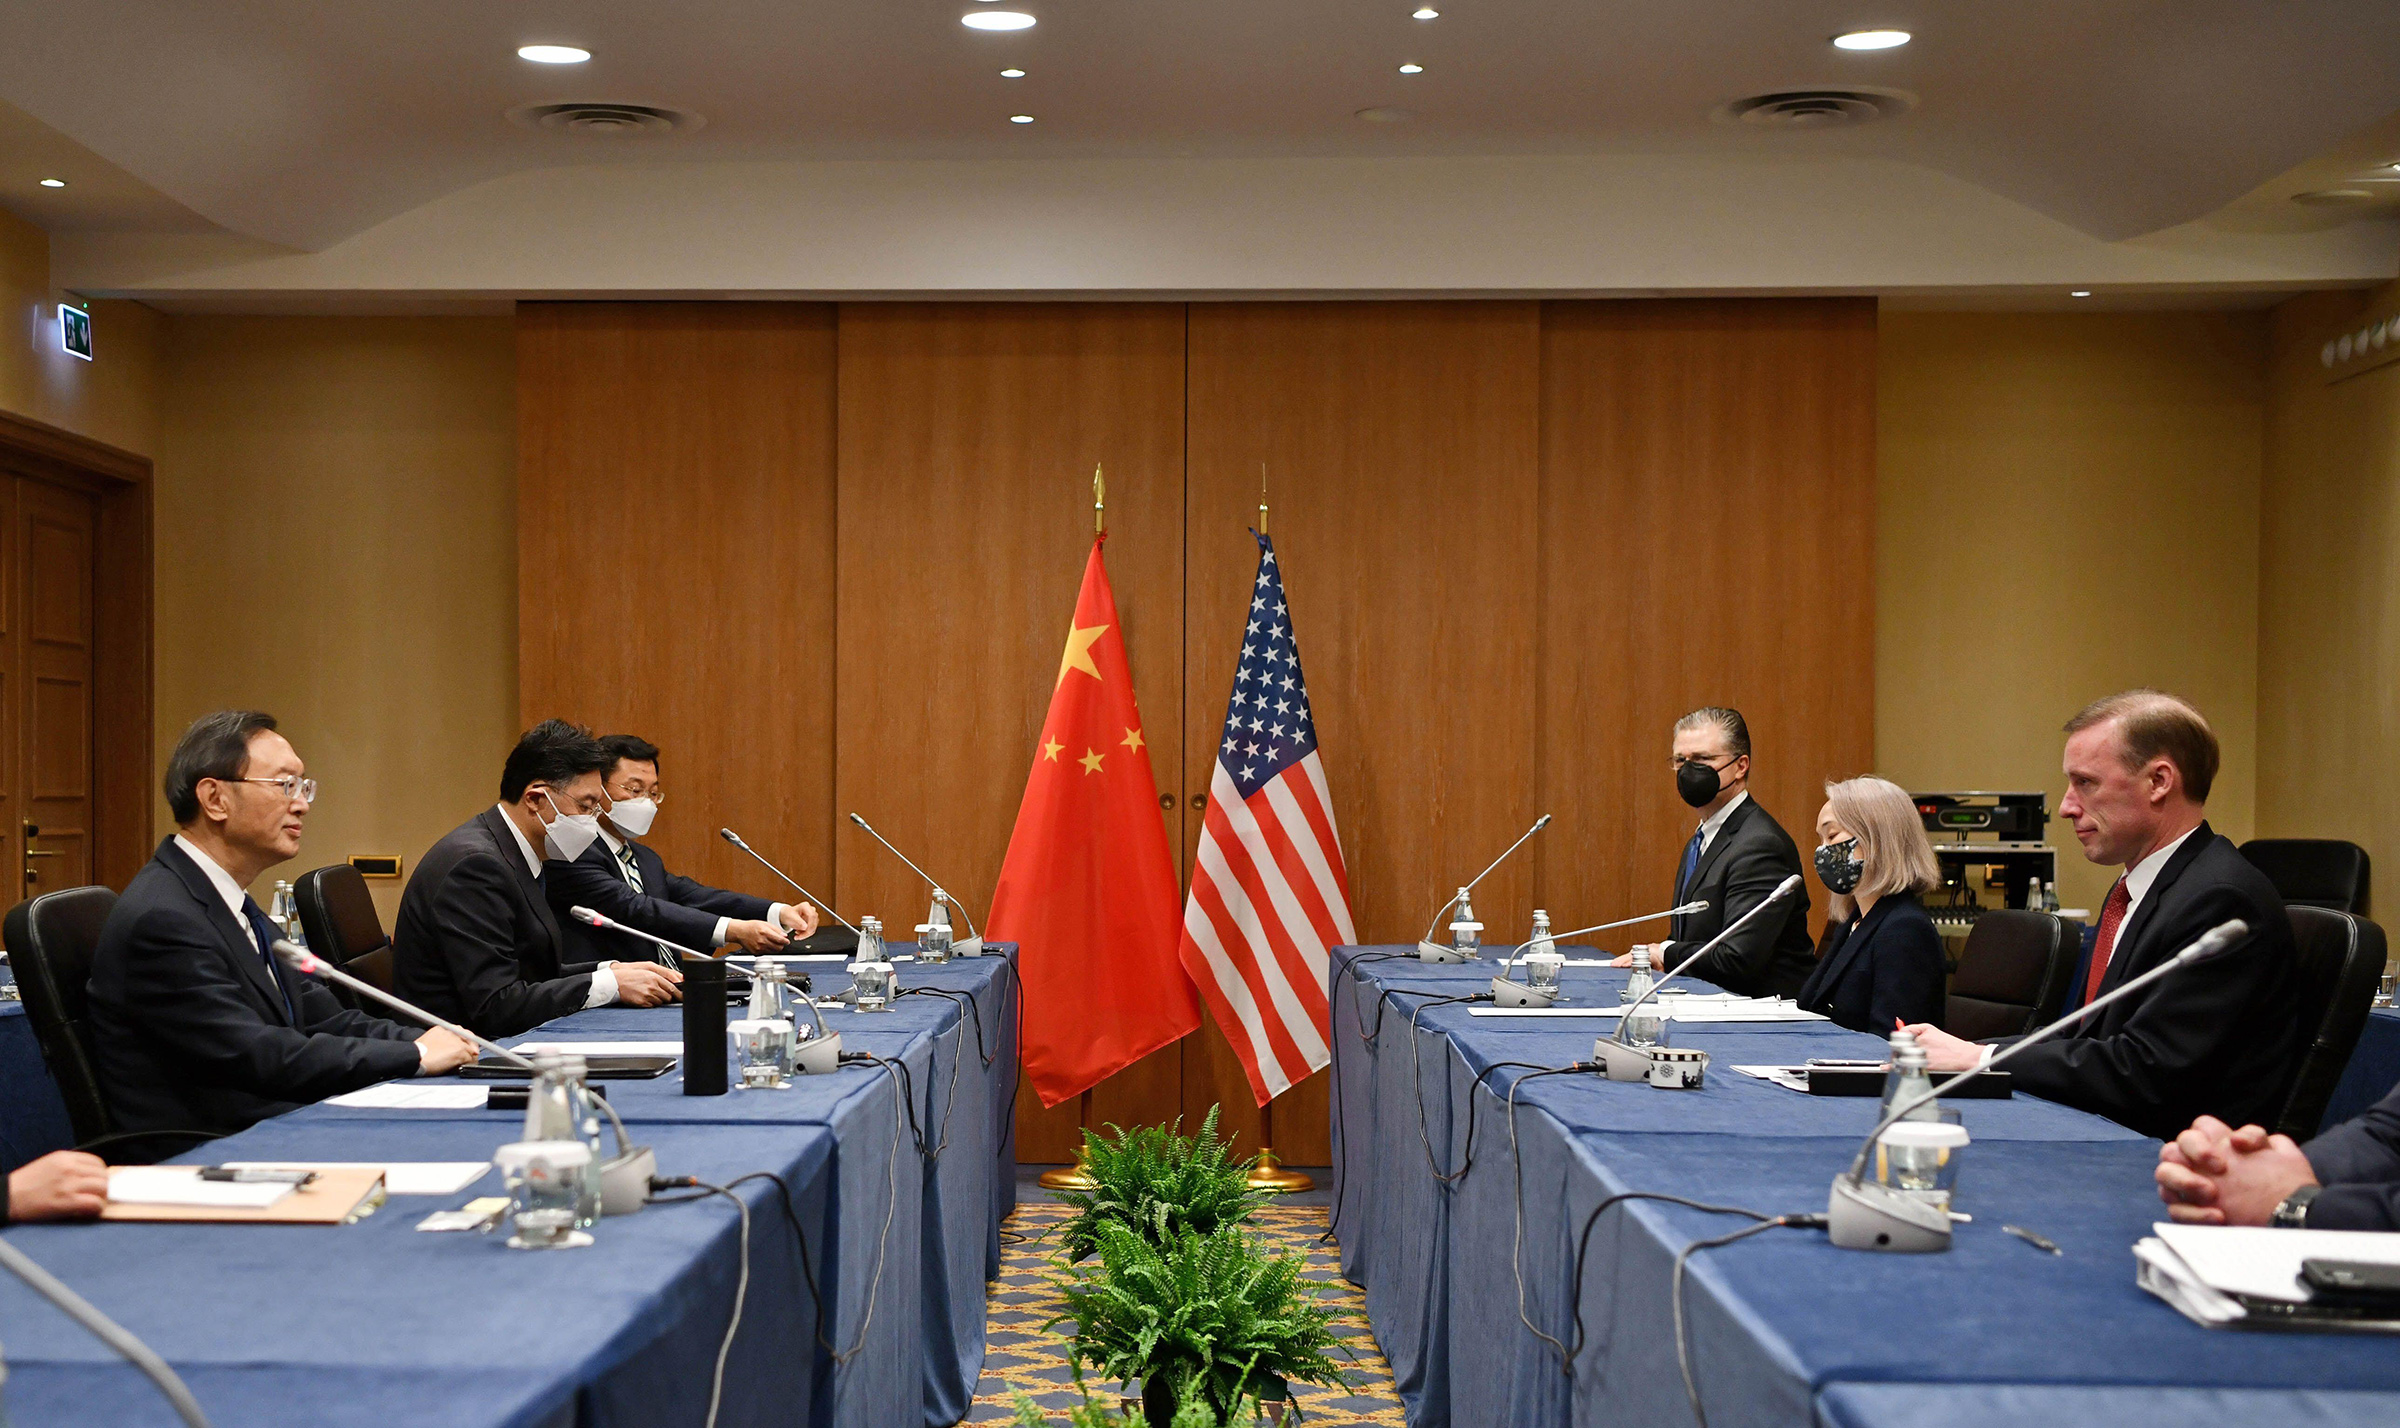 Yang Jiechi, left, a member of the Political Bureau of the Communist Party of China Central Committee and director of the Office of the Foreign Affairs Commission of the CPC Central Committee, meets with U.S. National Security Advisor Jake Sullivan, right in Rome on March 14 (Jin Mamengni—Xinhua/Alamy)